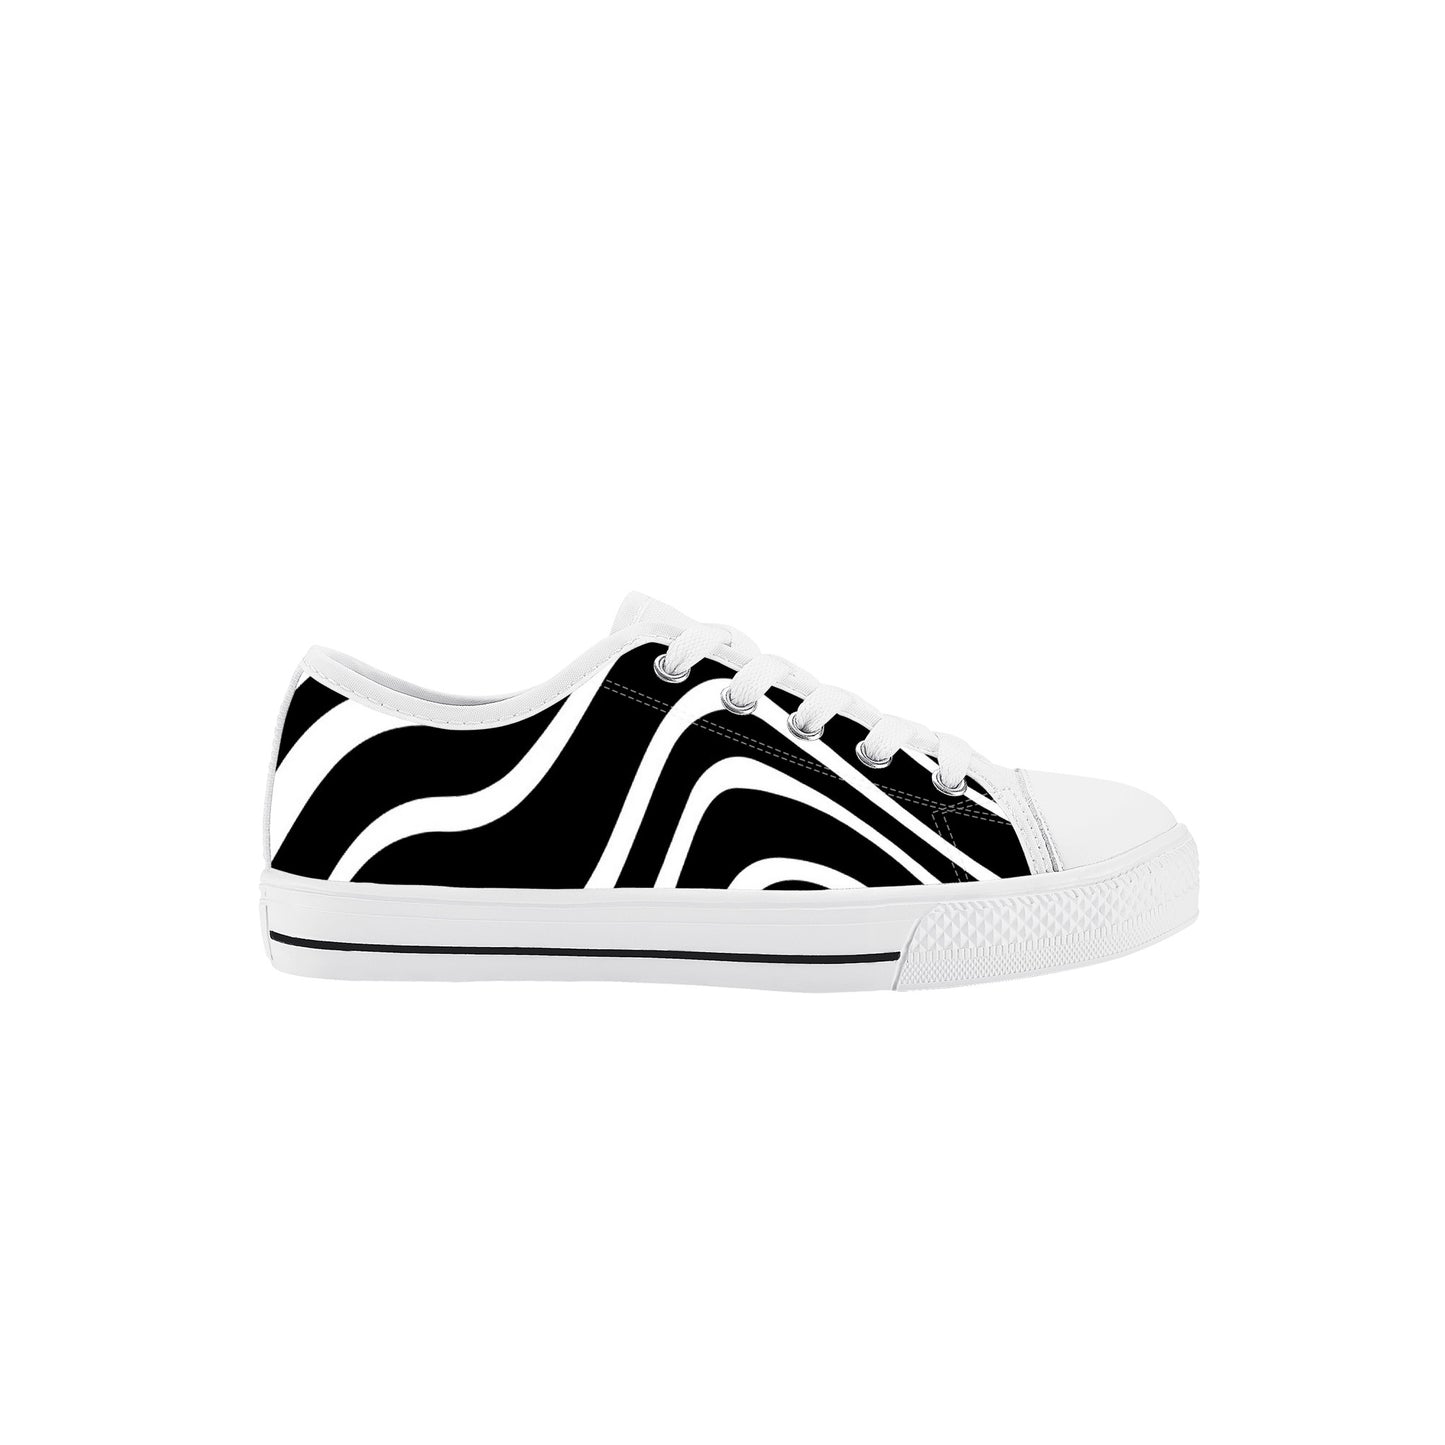 Kids Low Top Canvas Sneakers - Black/White